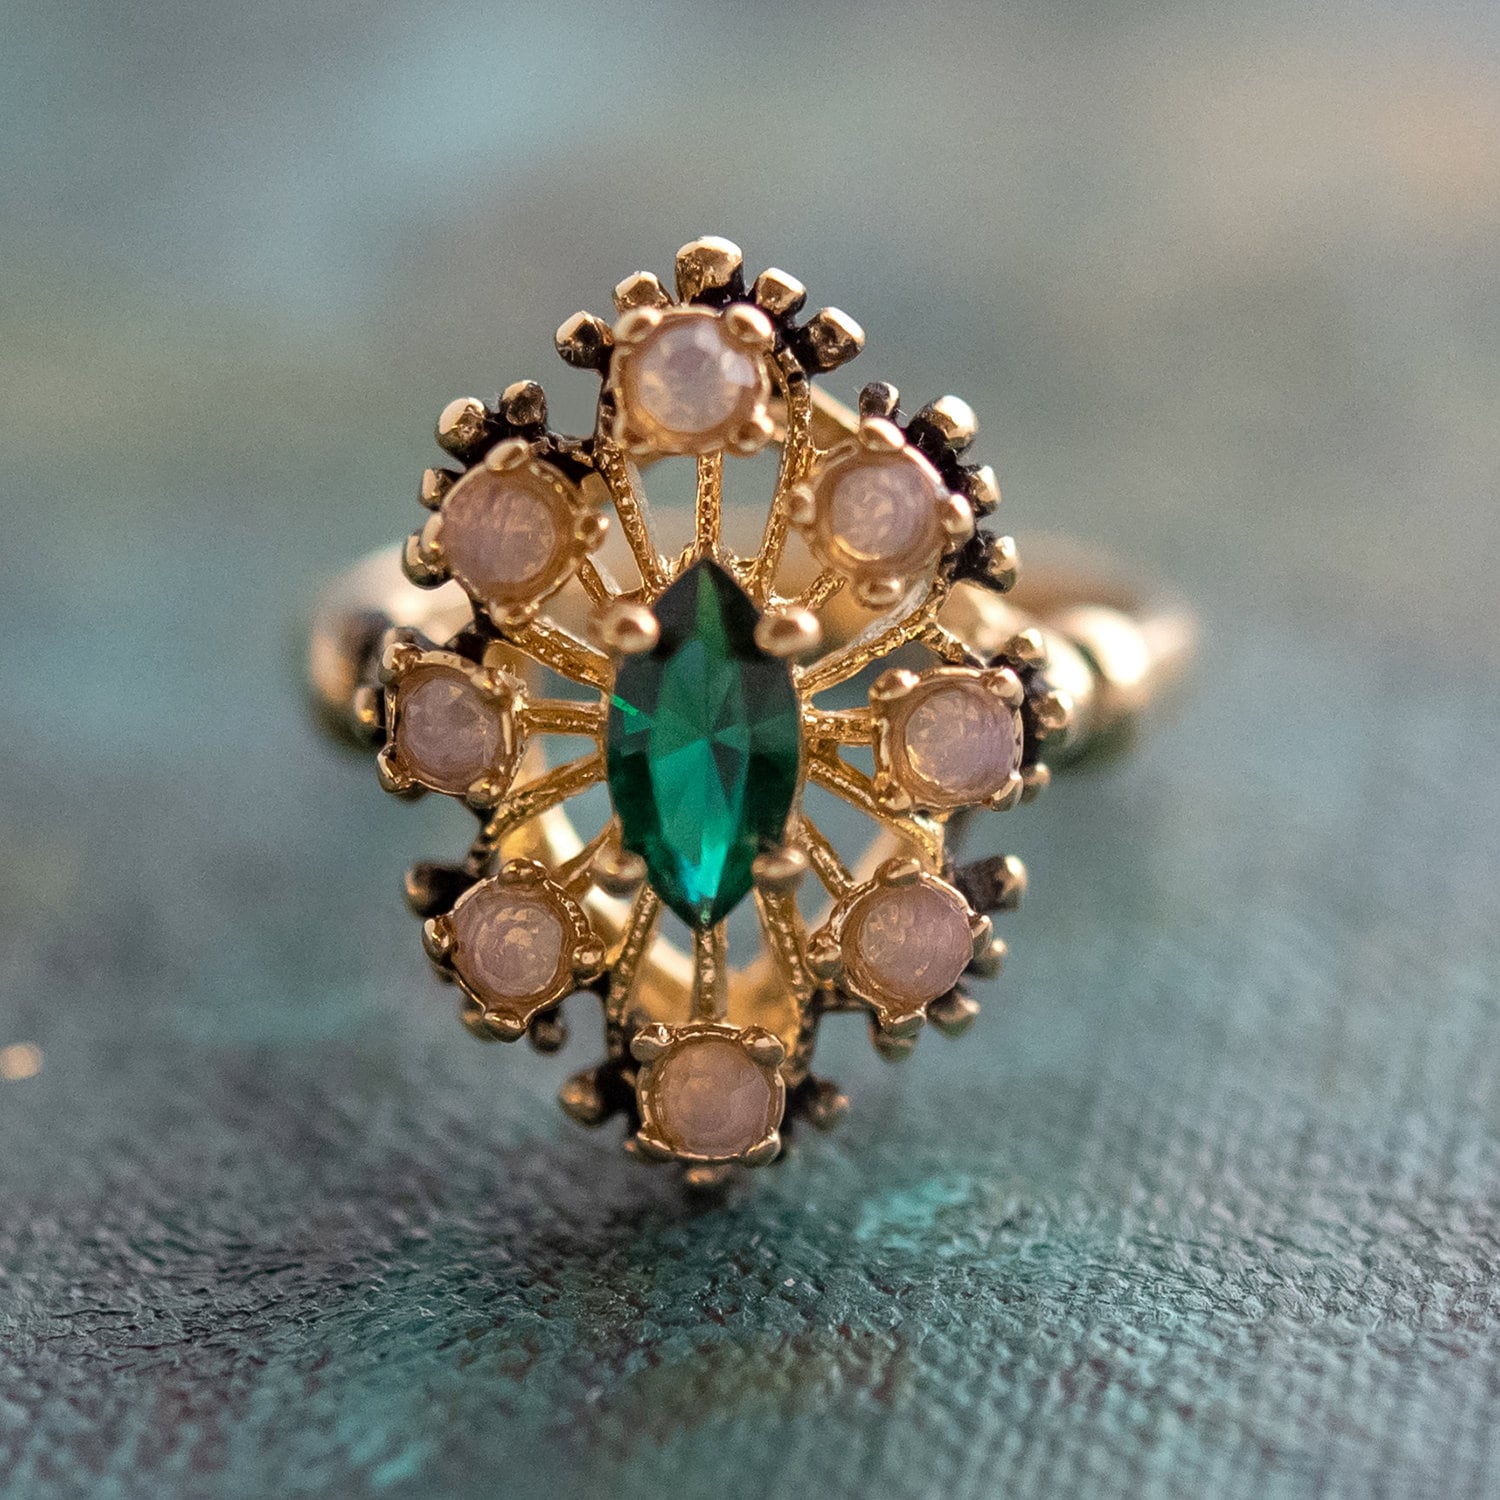 Vintage Ring Emerald and Pinfire Opal Cocktail Ring Birthstone 18kt Antique Jewelry for Women - Limited Stock - Never Worn